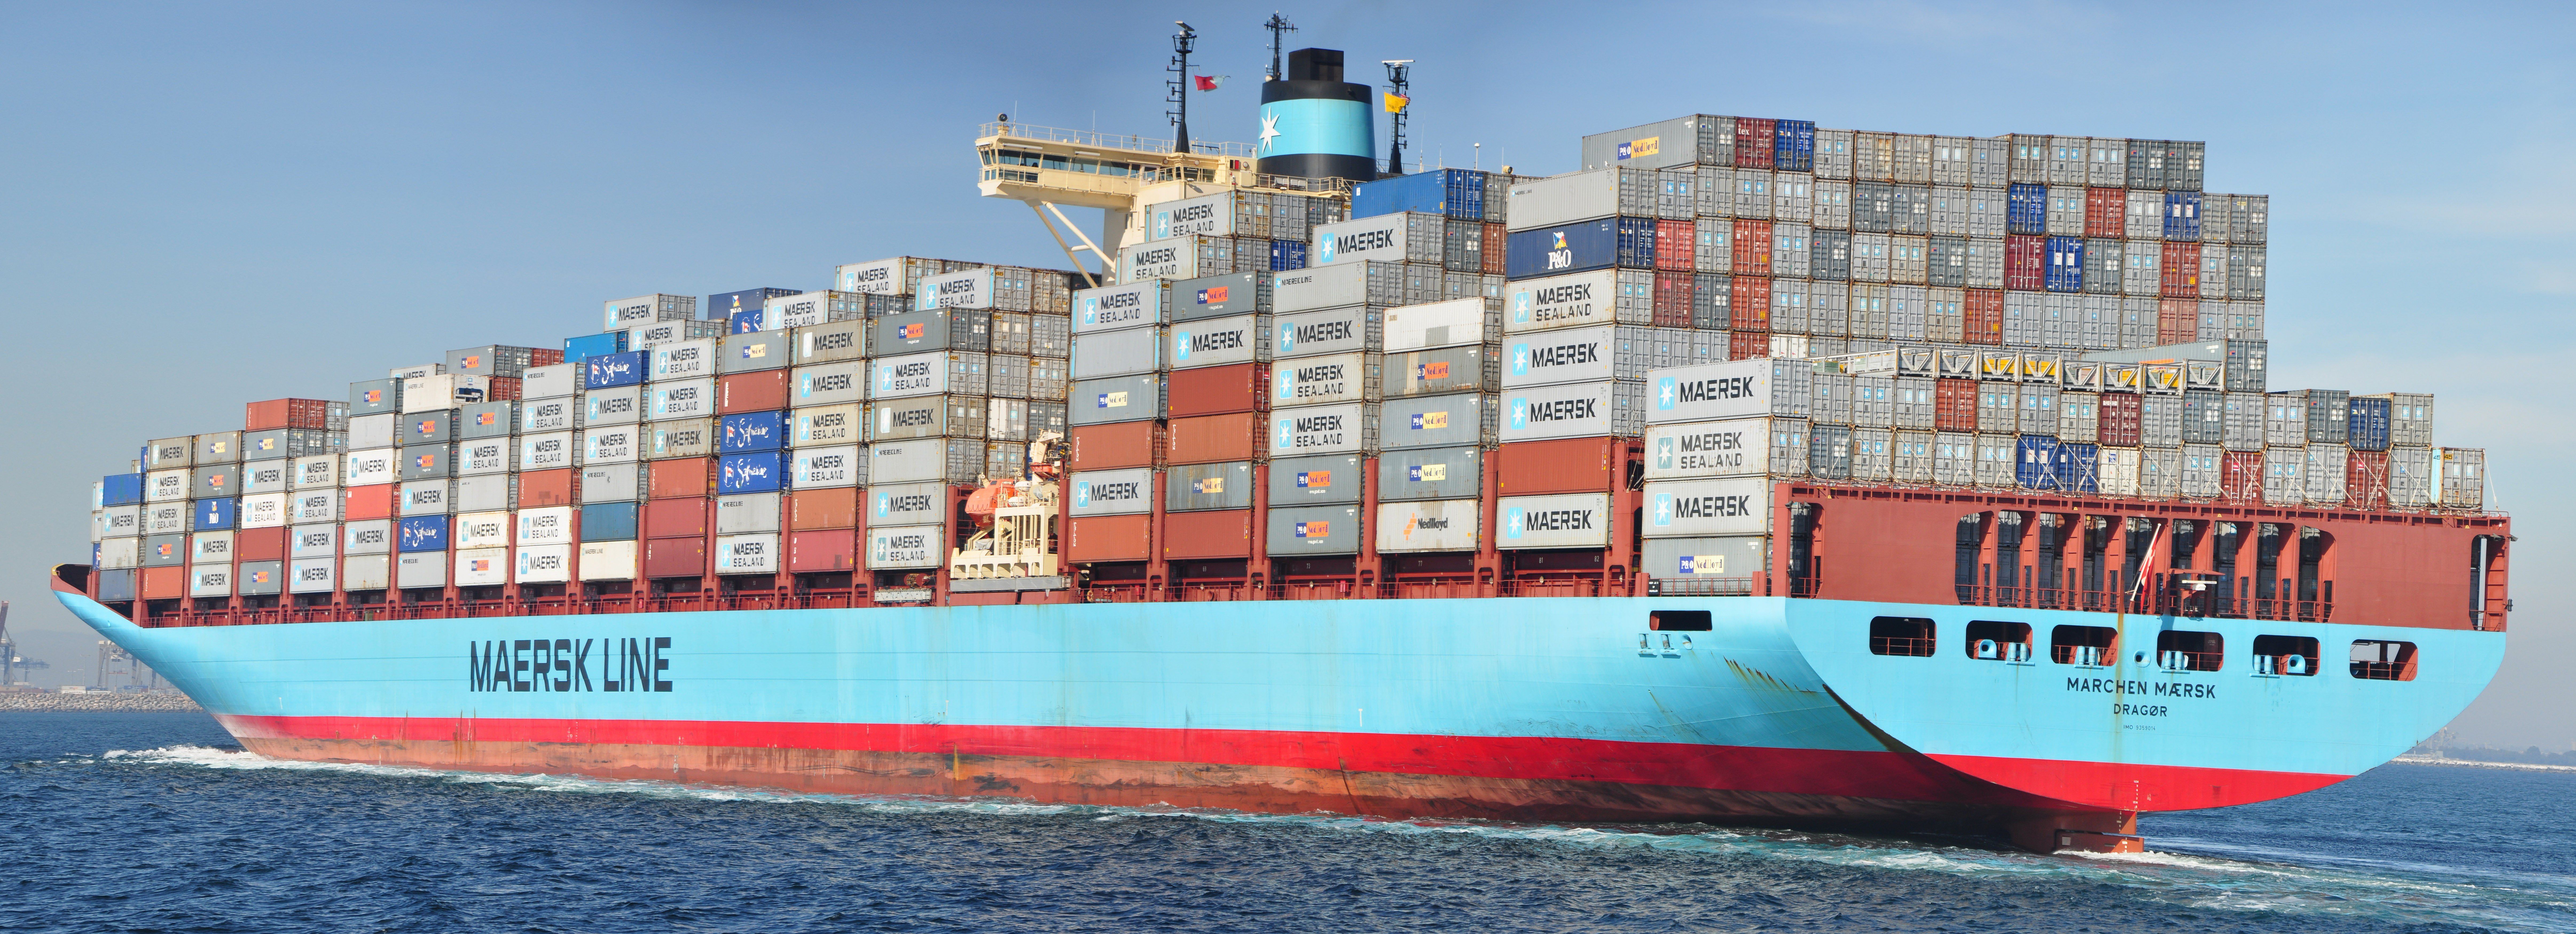 Maersk, Maersk Line, Cargo, Container ship, Dual monitors HD Wallpaper / Desktop and Mobile Image & Photo